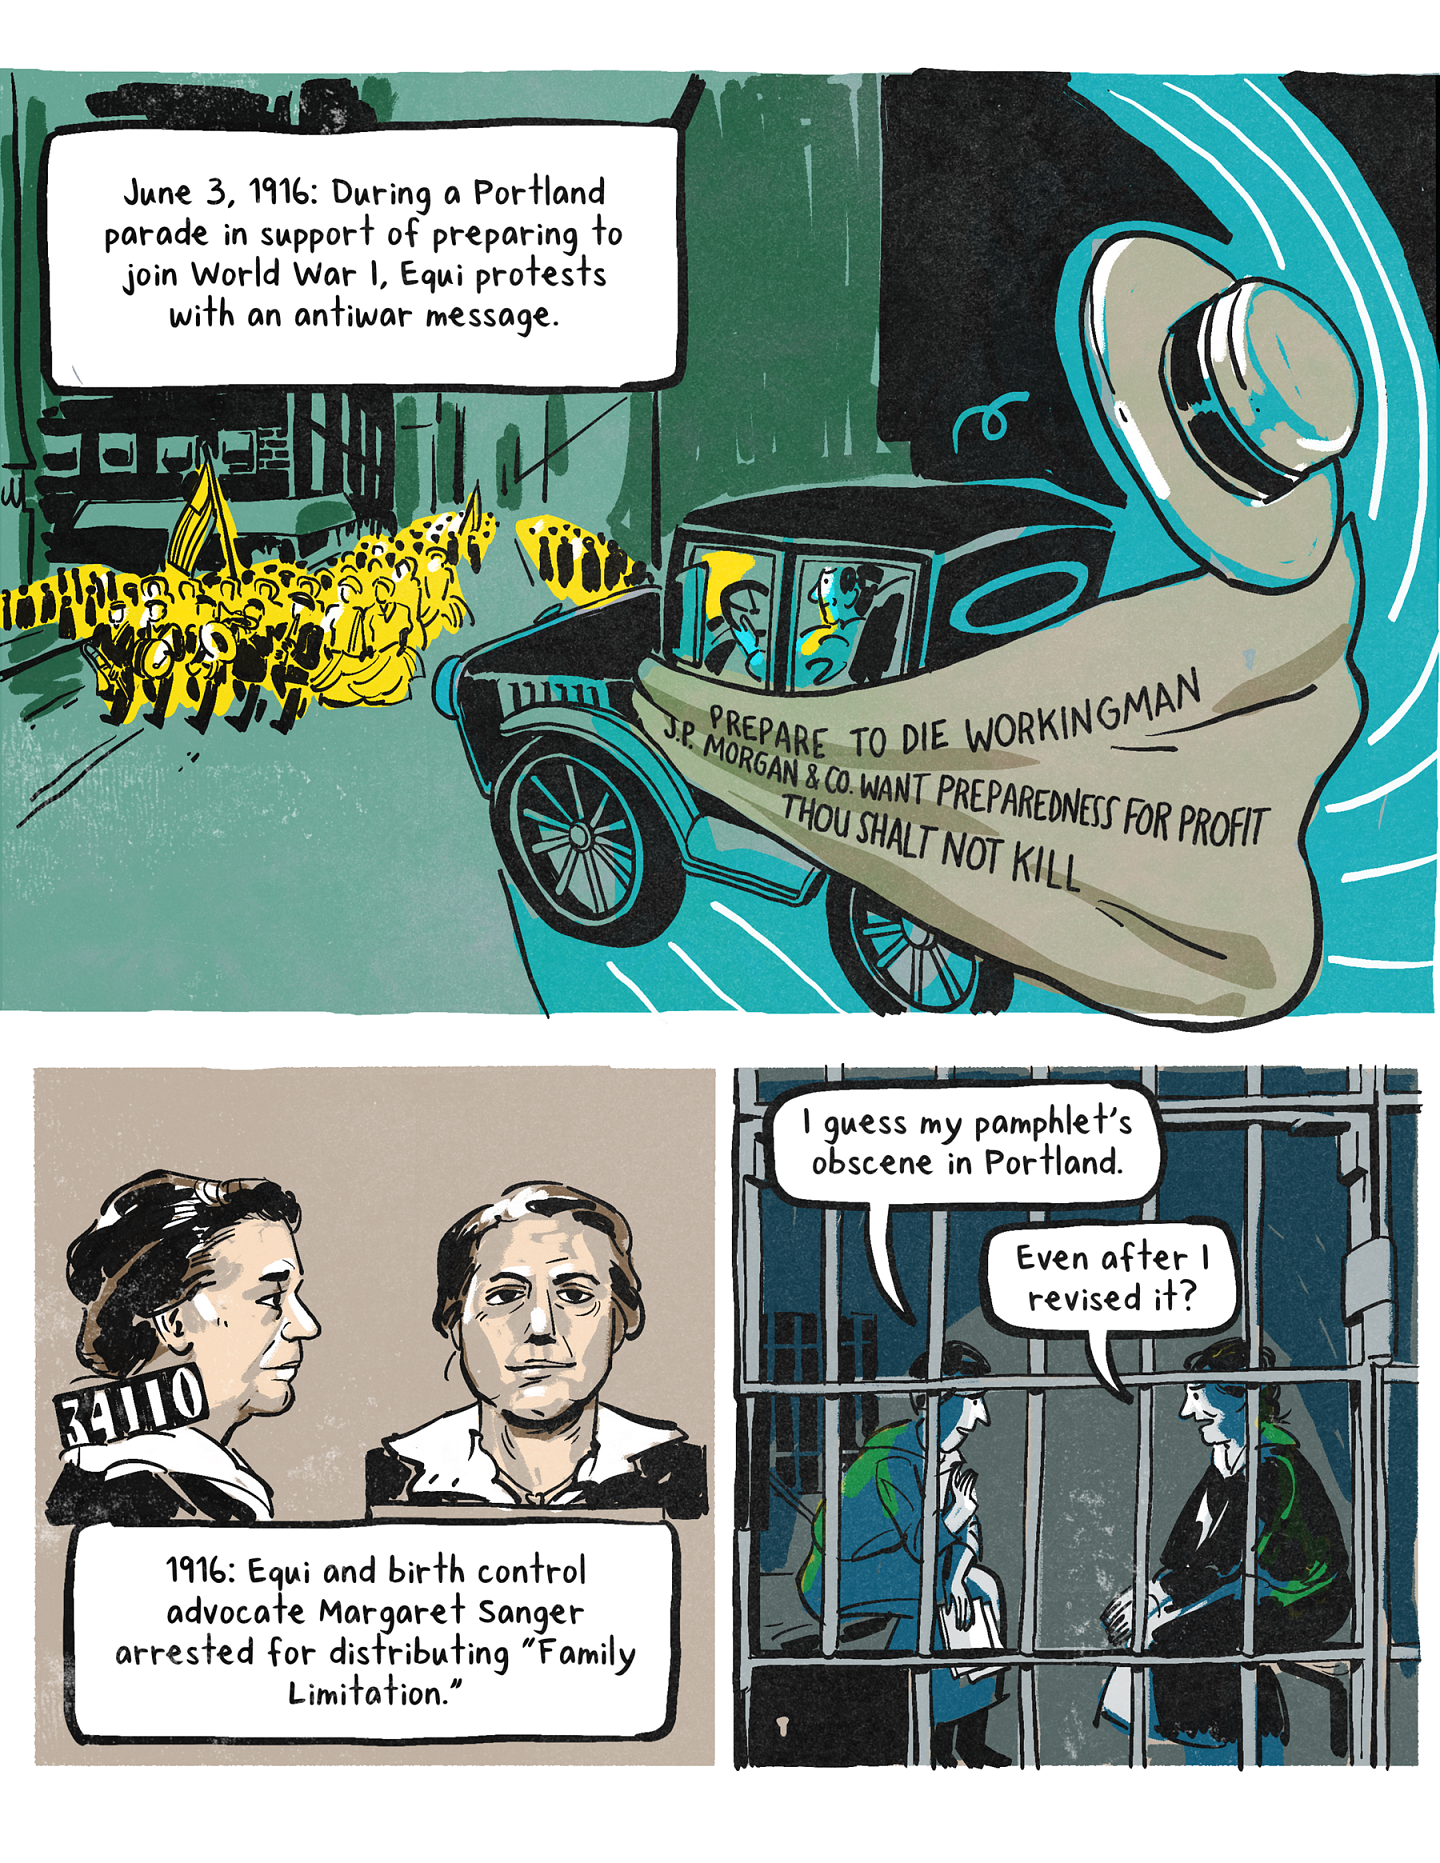 Illustration of Marie Equi protesting WWI and in jail with Margaret Sanger 